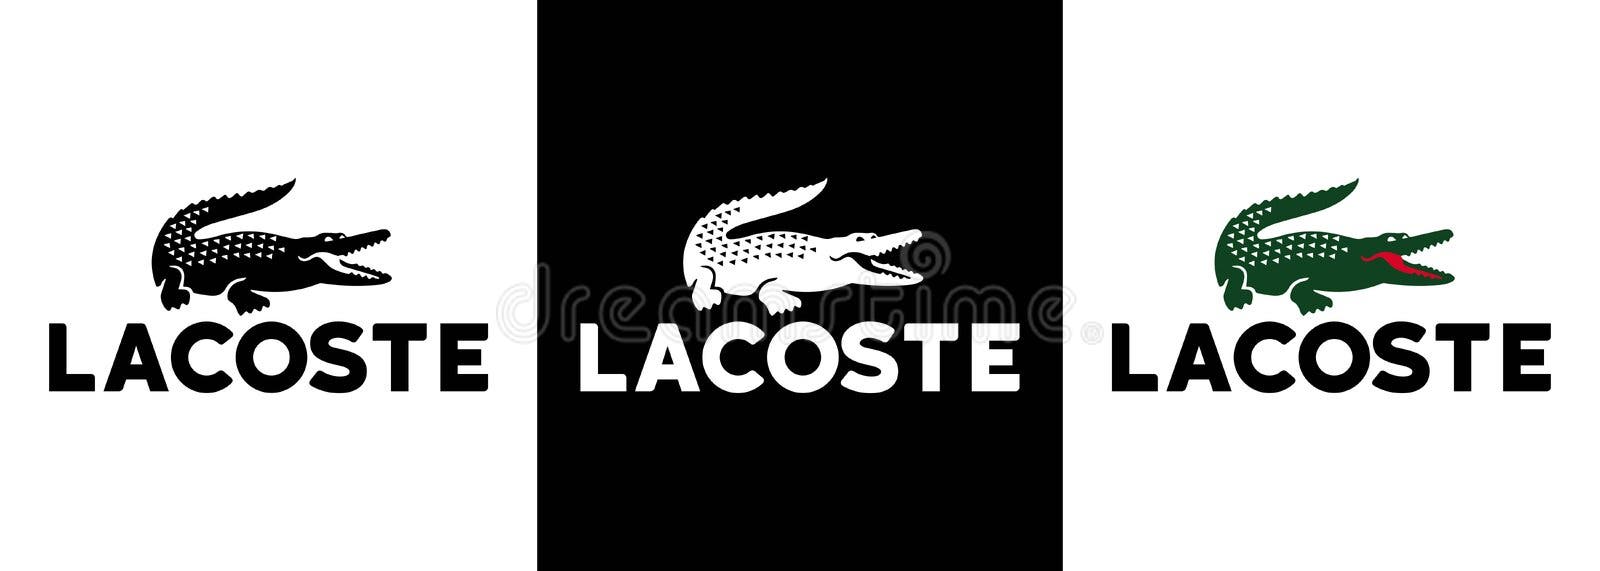 Lacoste Logo Vector Illustration on White Background Editorial Stock Image - of button, sign: 192037109